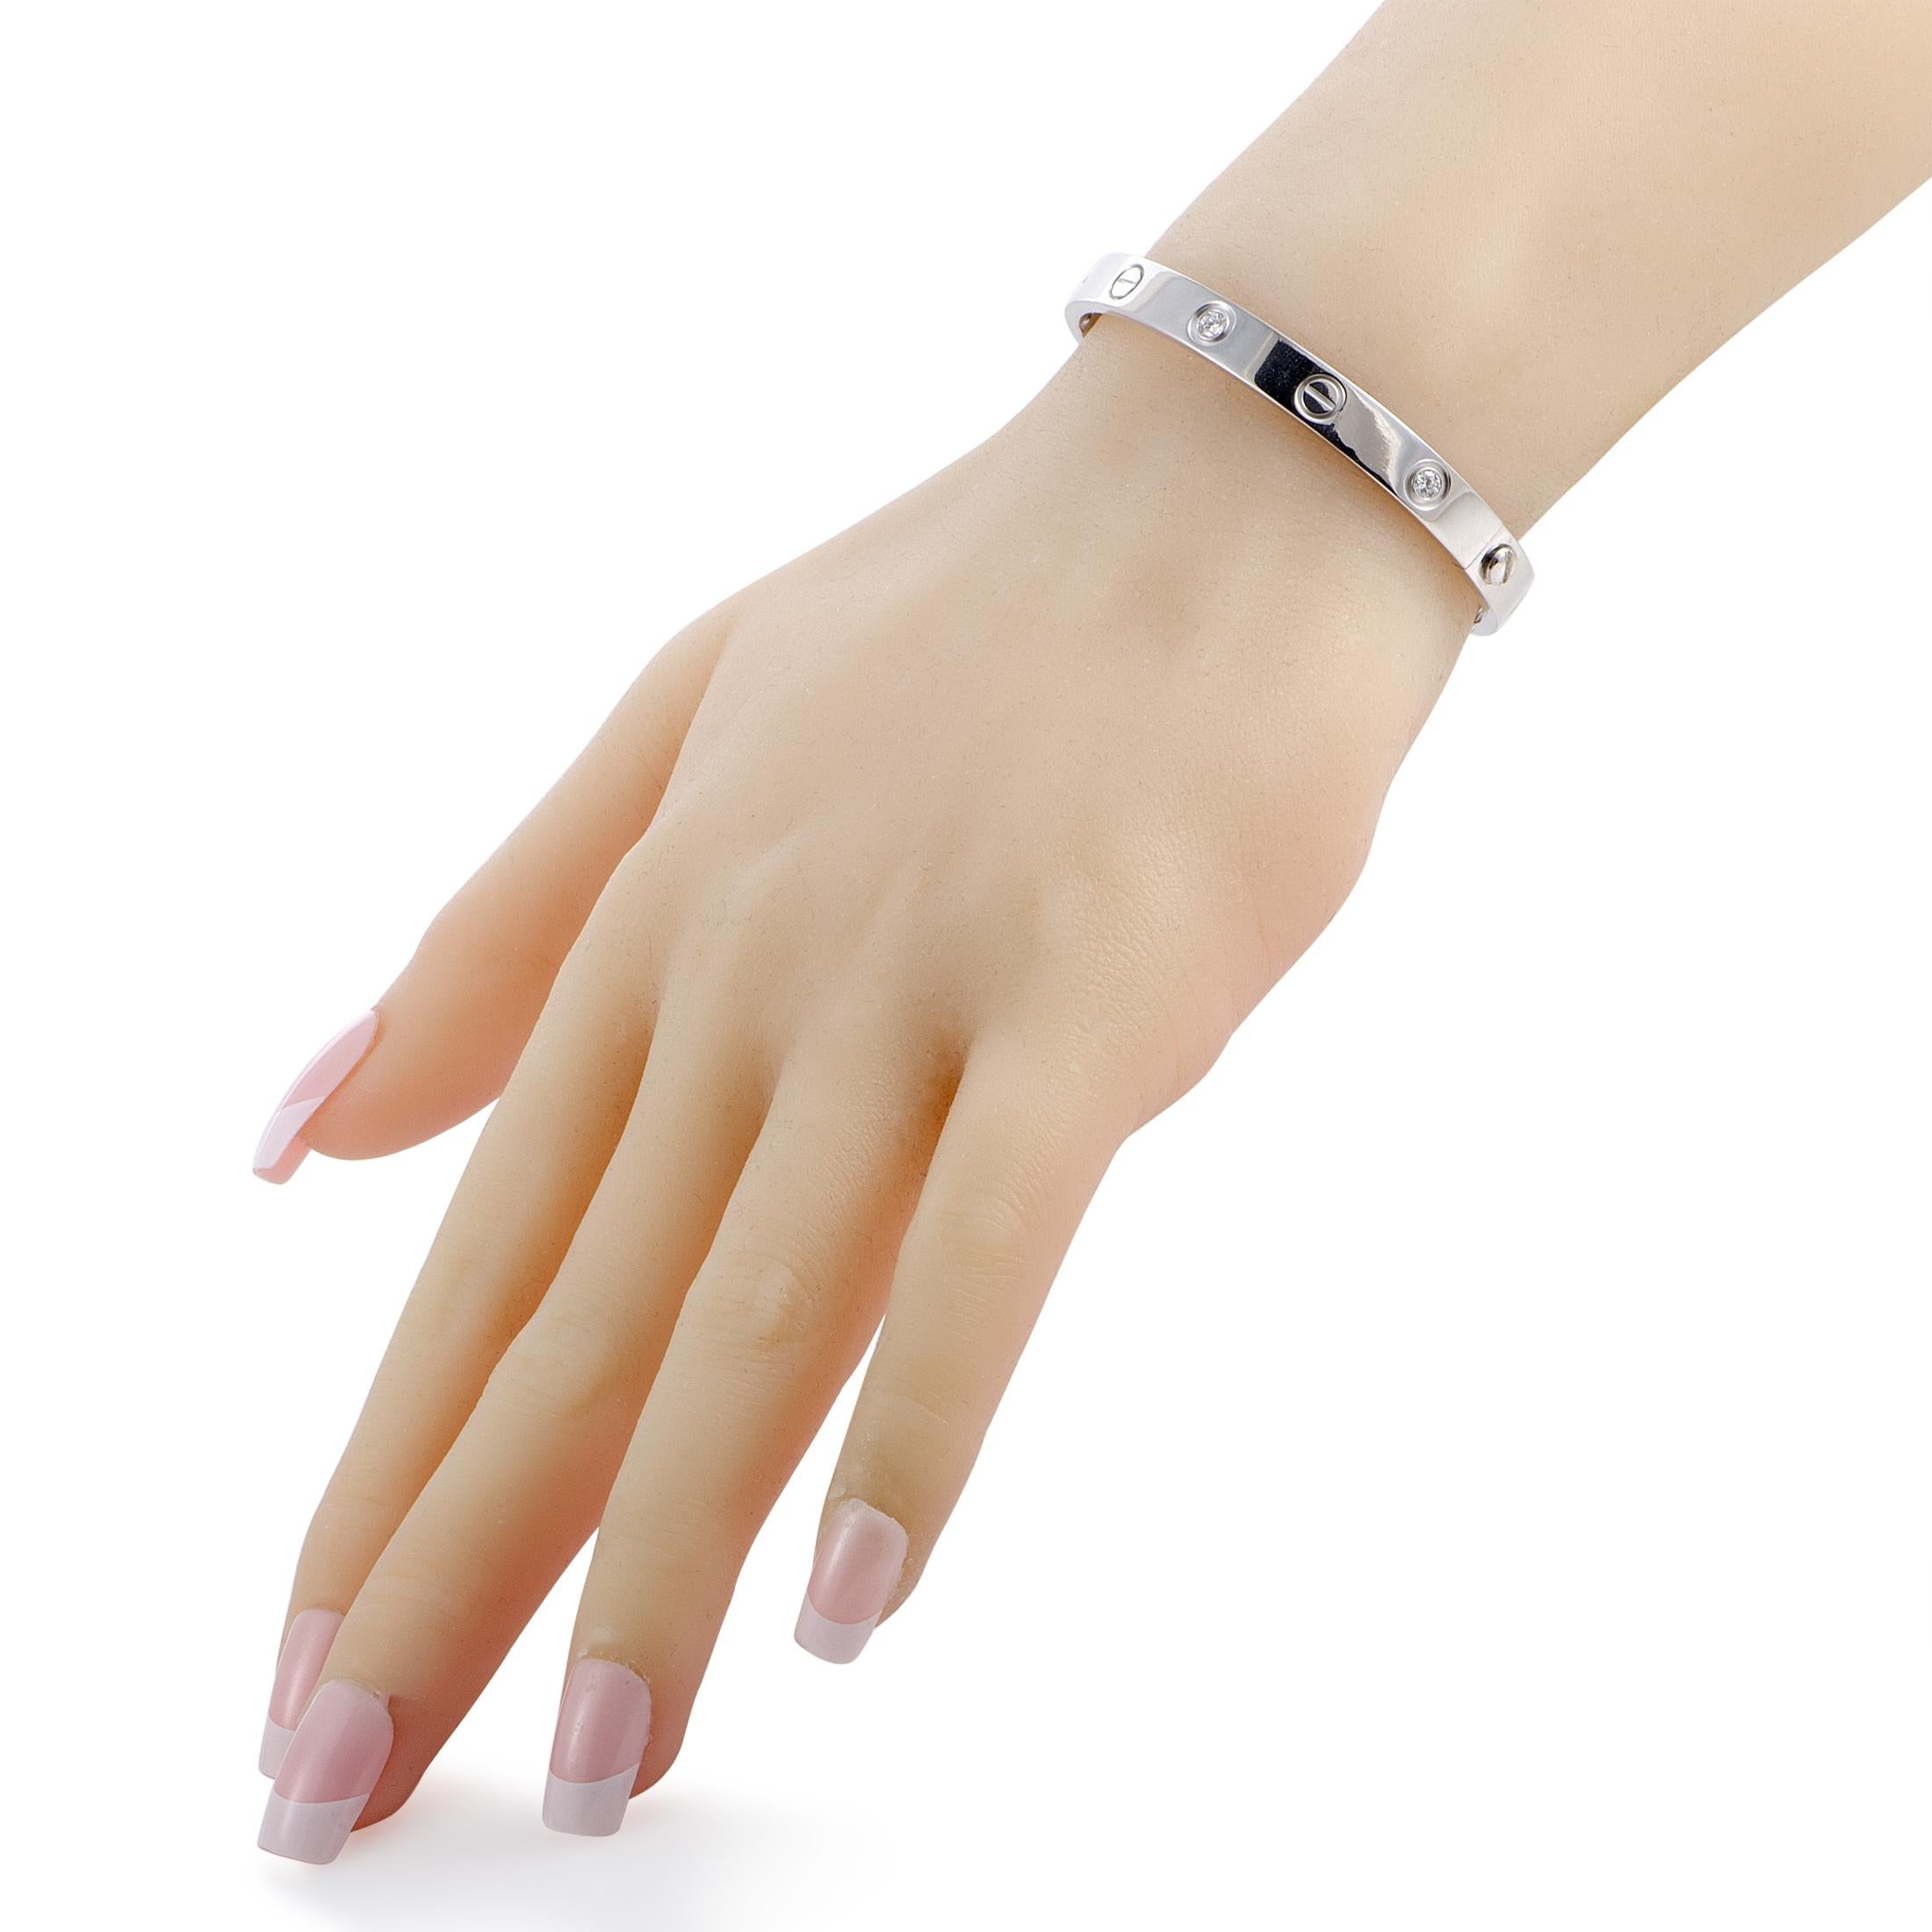 The Cartier “LOVE” bracelet is crafted from 18K white gold and set with six diamond stones that weigh 0.60 carats in total. The bracelet weighs 30.7 grams and is offered in size 16, boasting length of 7.00” and diameter of 2.25”.

This item includes